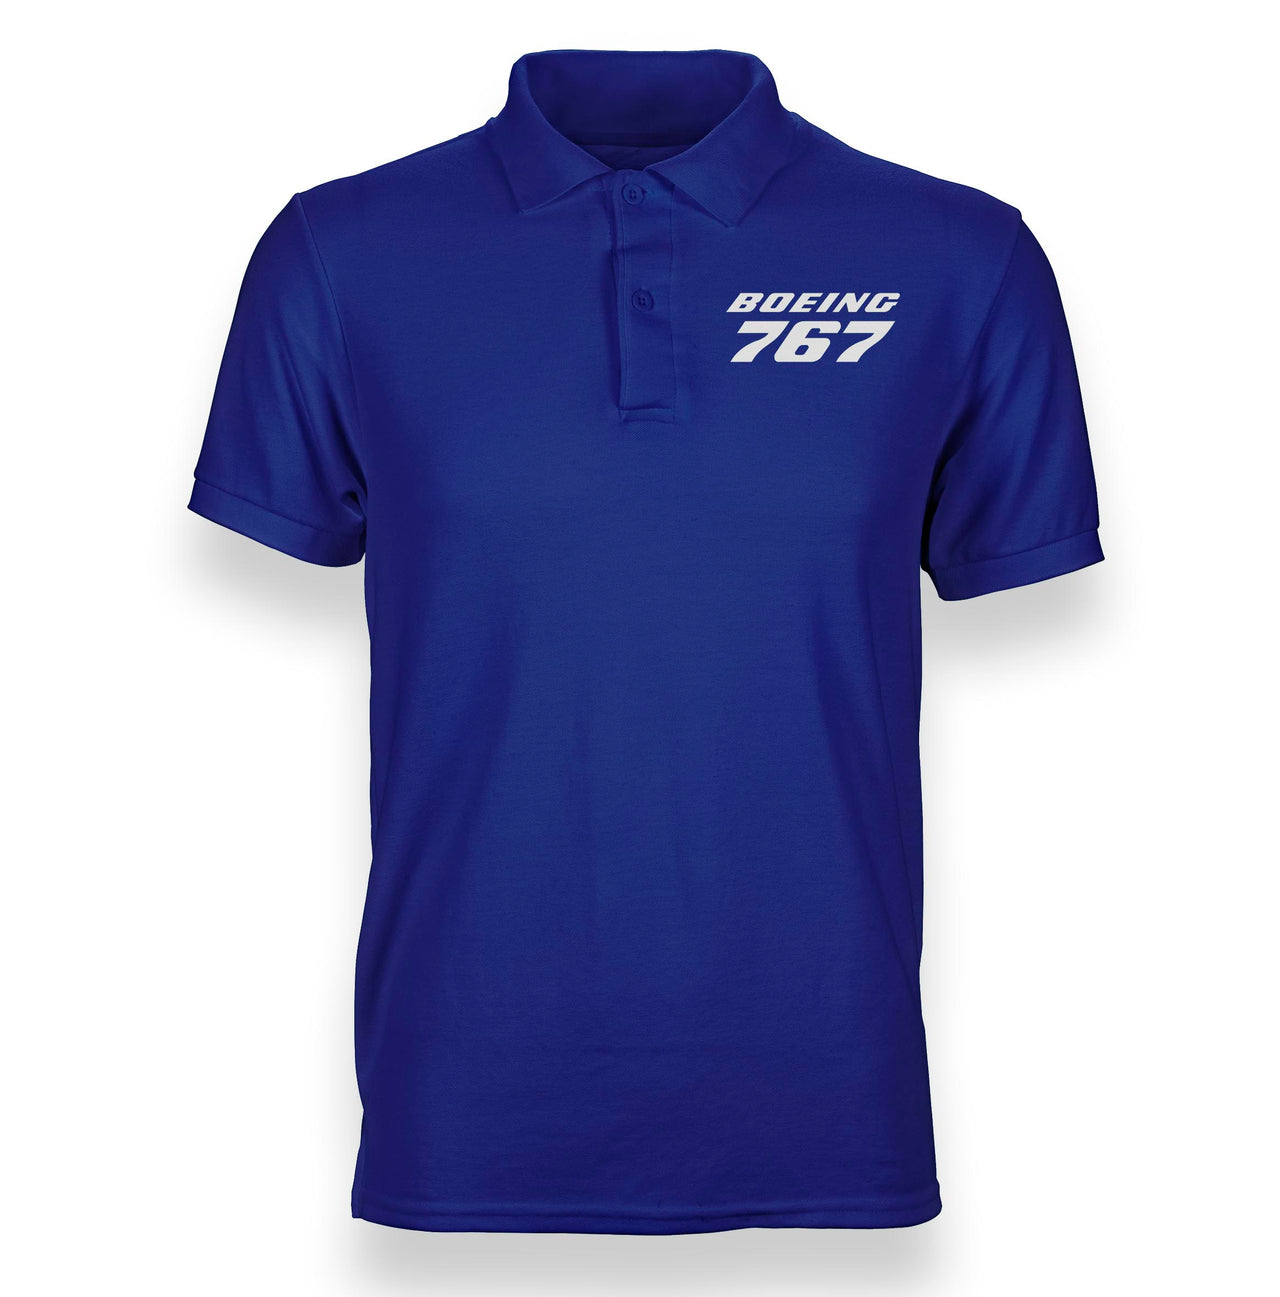 Boeing 767 & Text Designed Polo T-Shirts